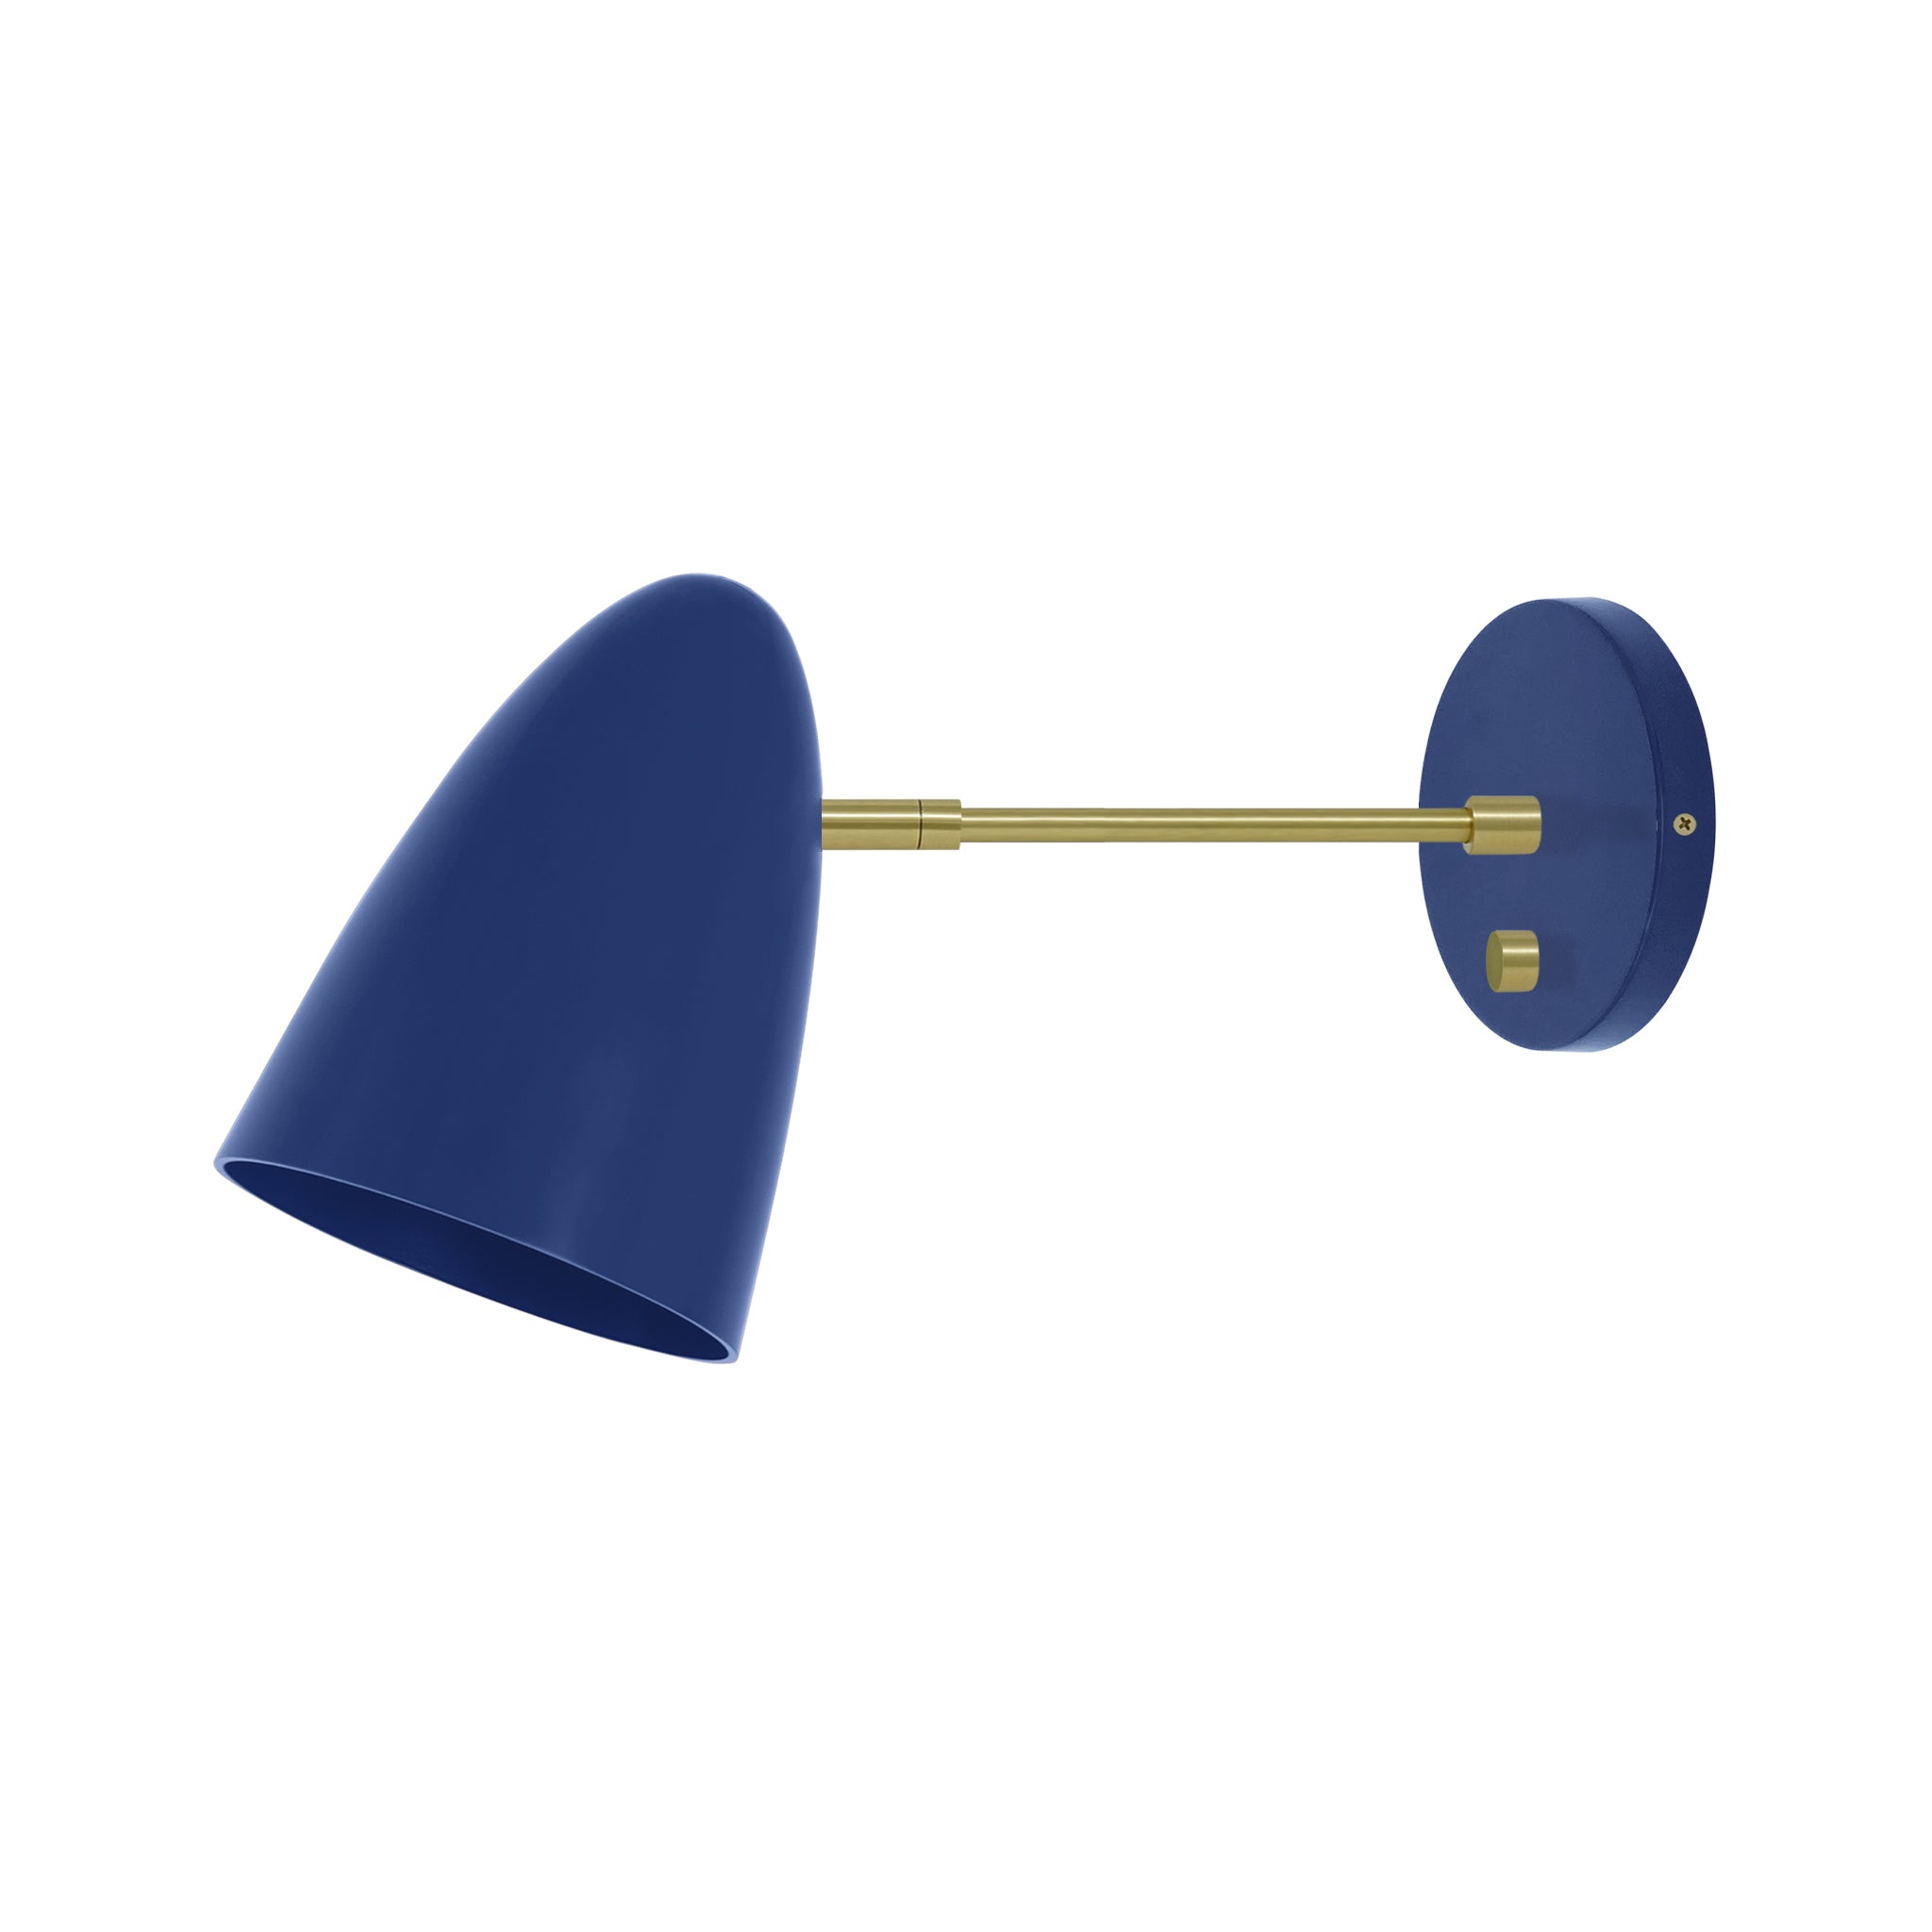 Brass and cobalt color Boom sconce 6" arm Dutton Brown lighting